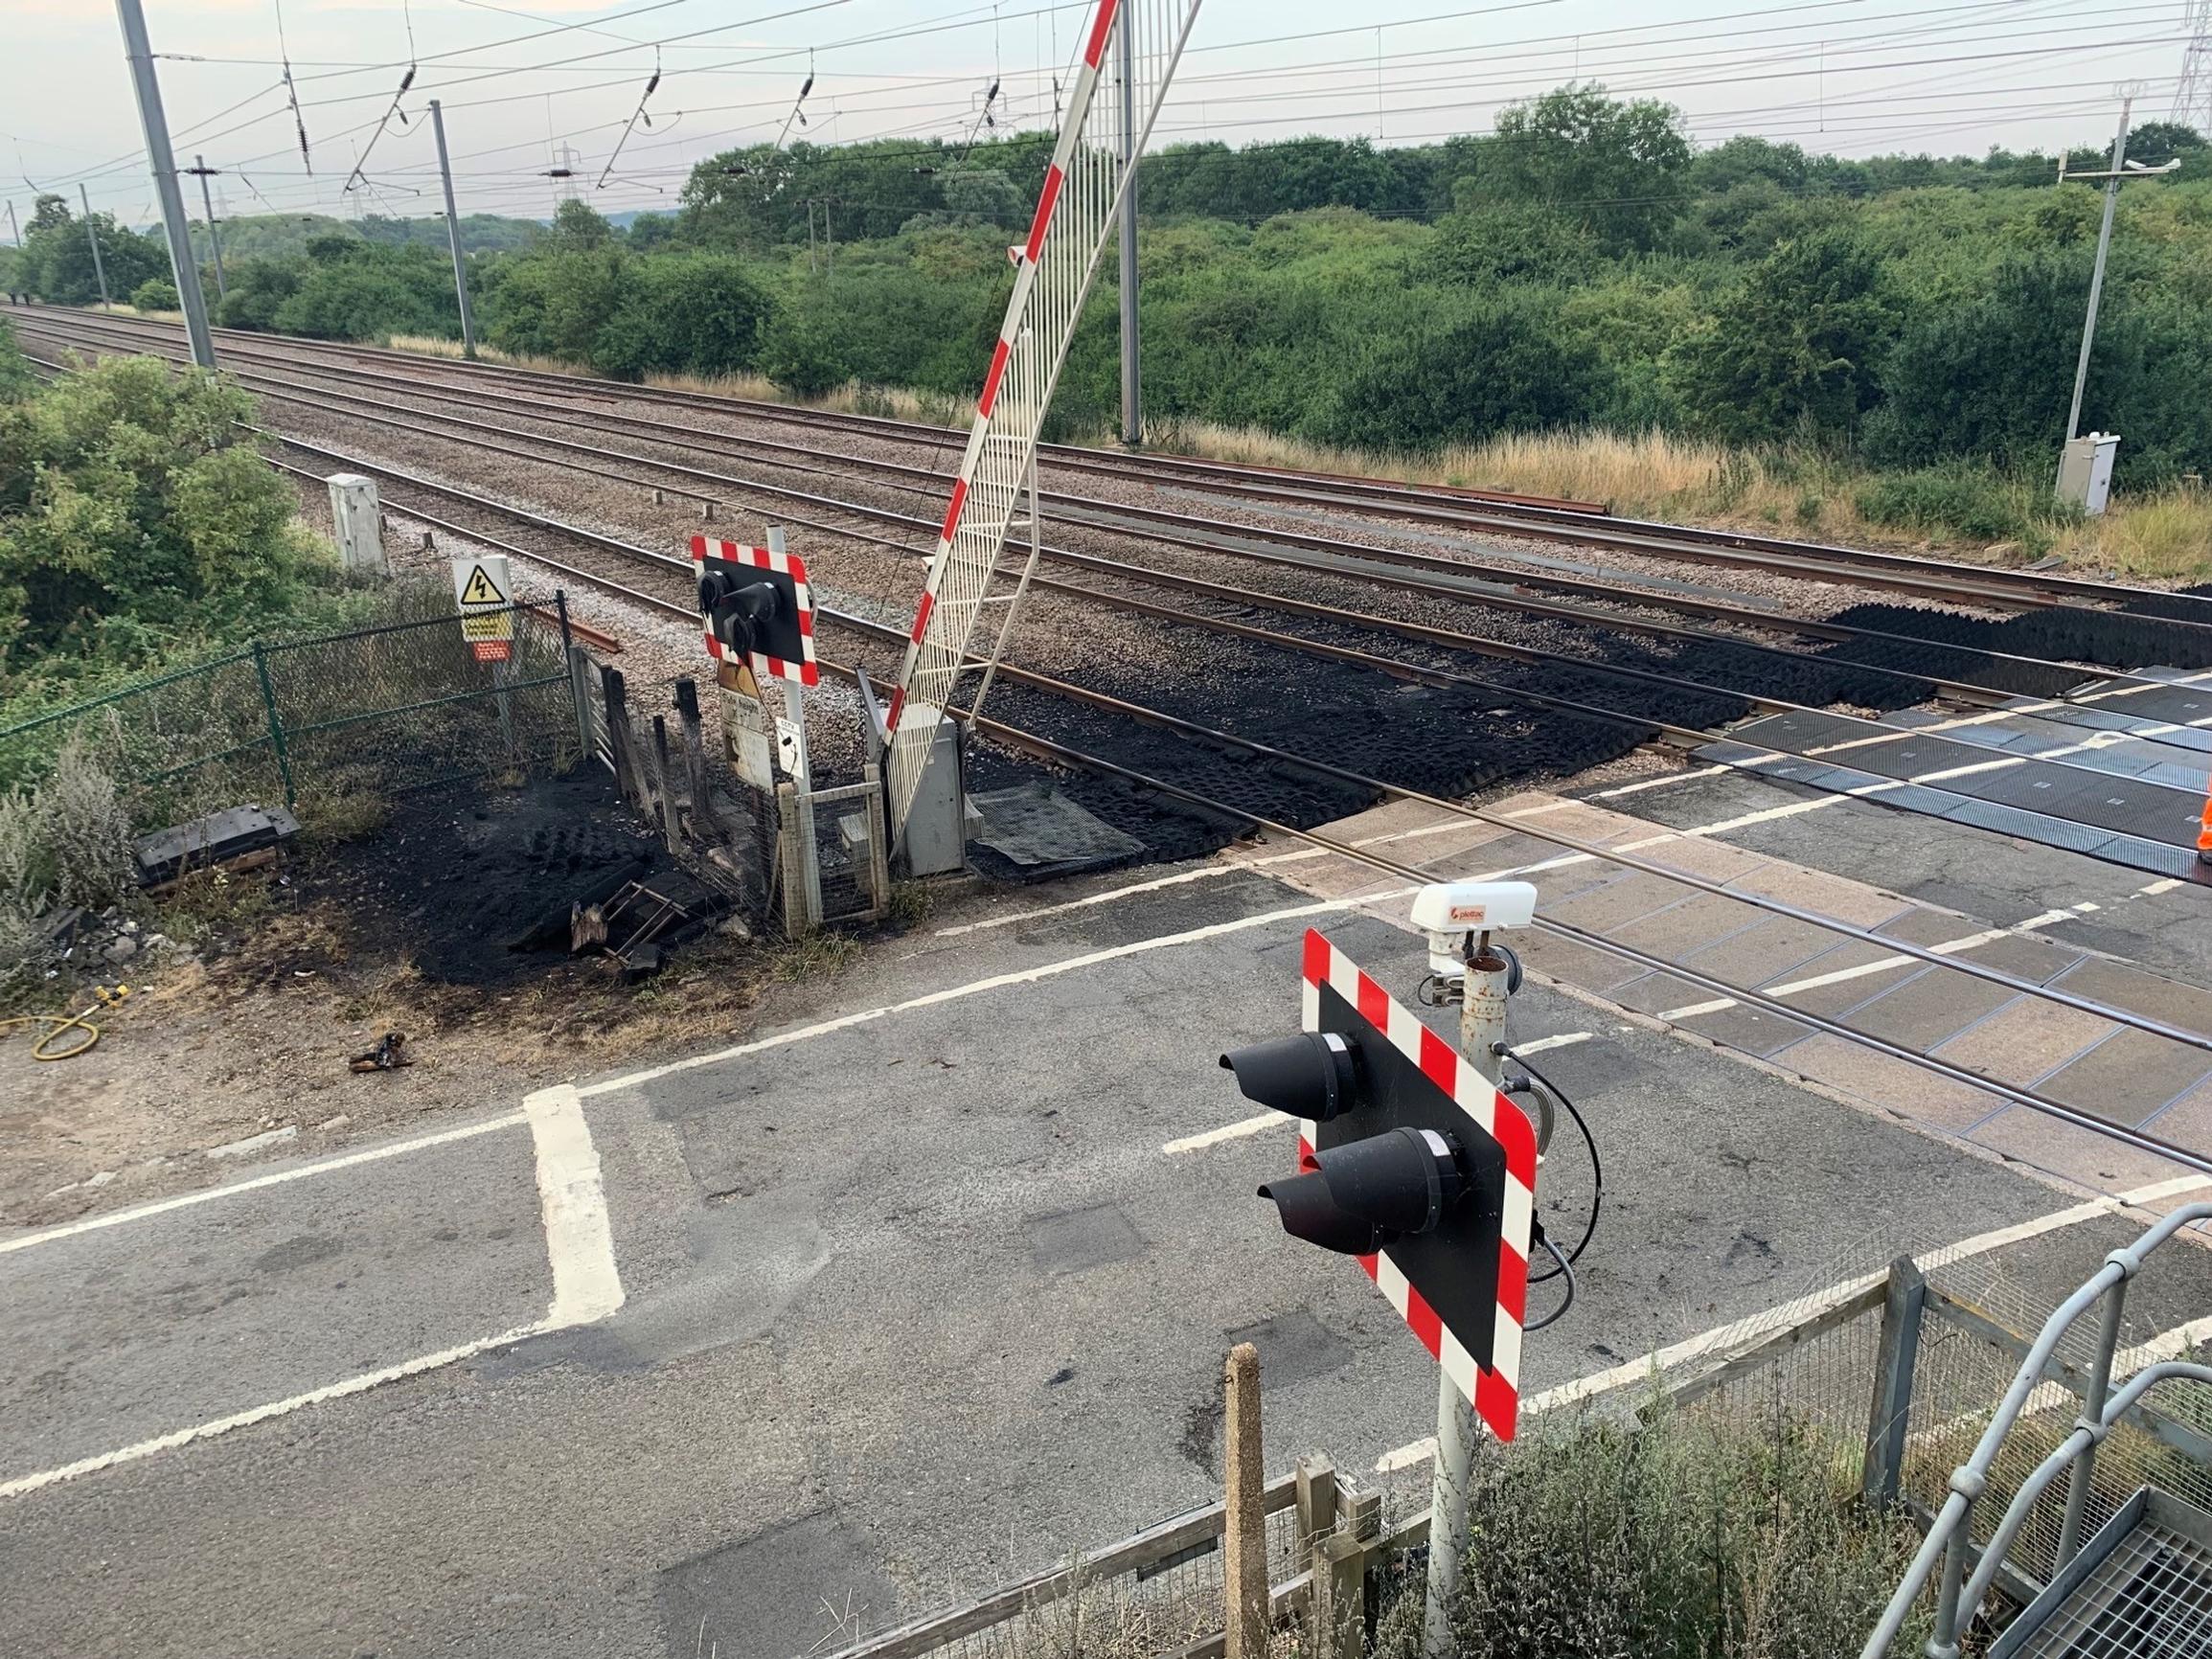 Damage caused by fire on the railway at Sandy, Bedfordshire